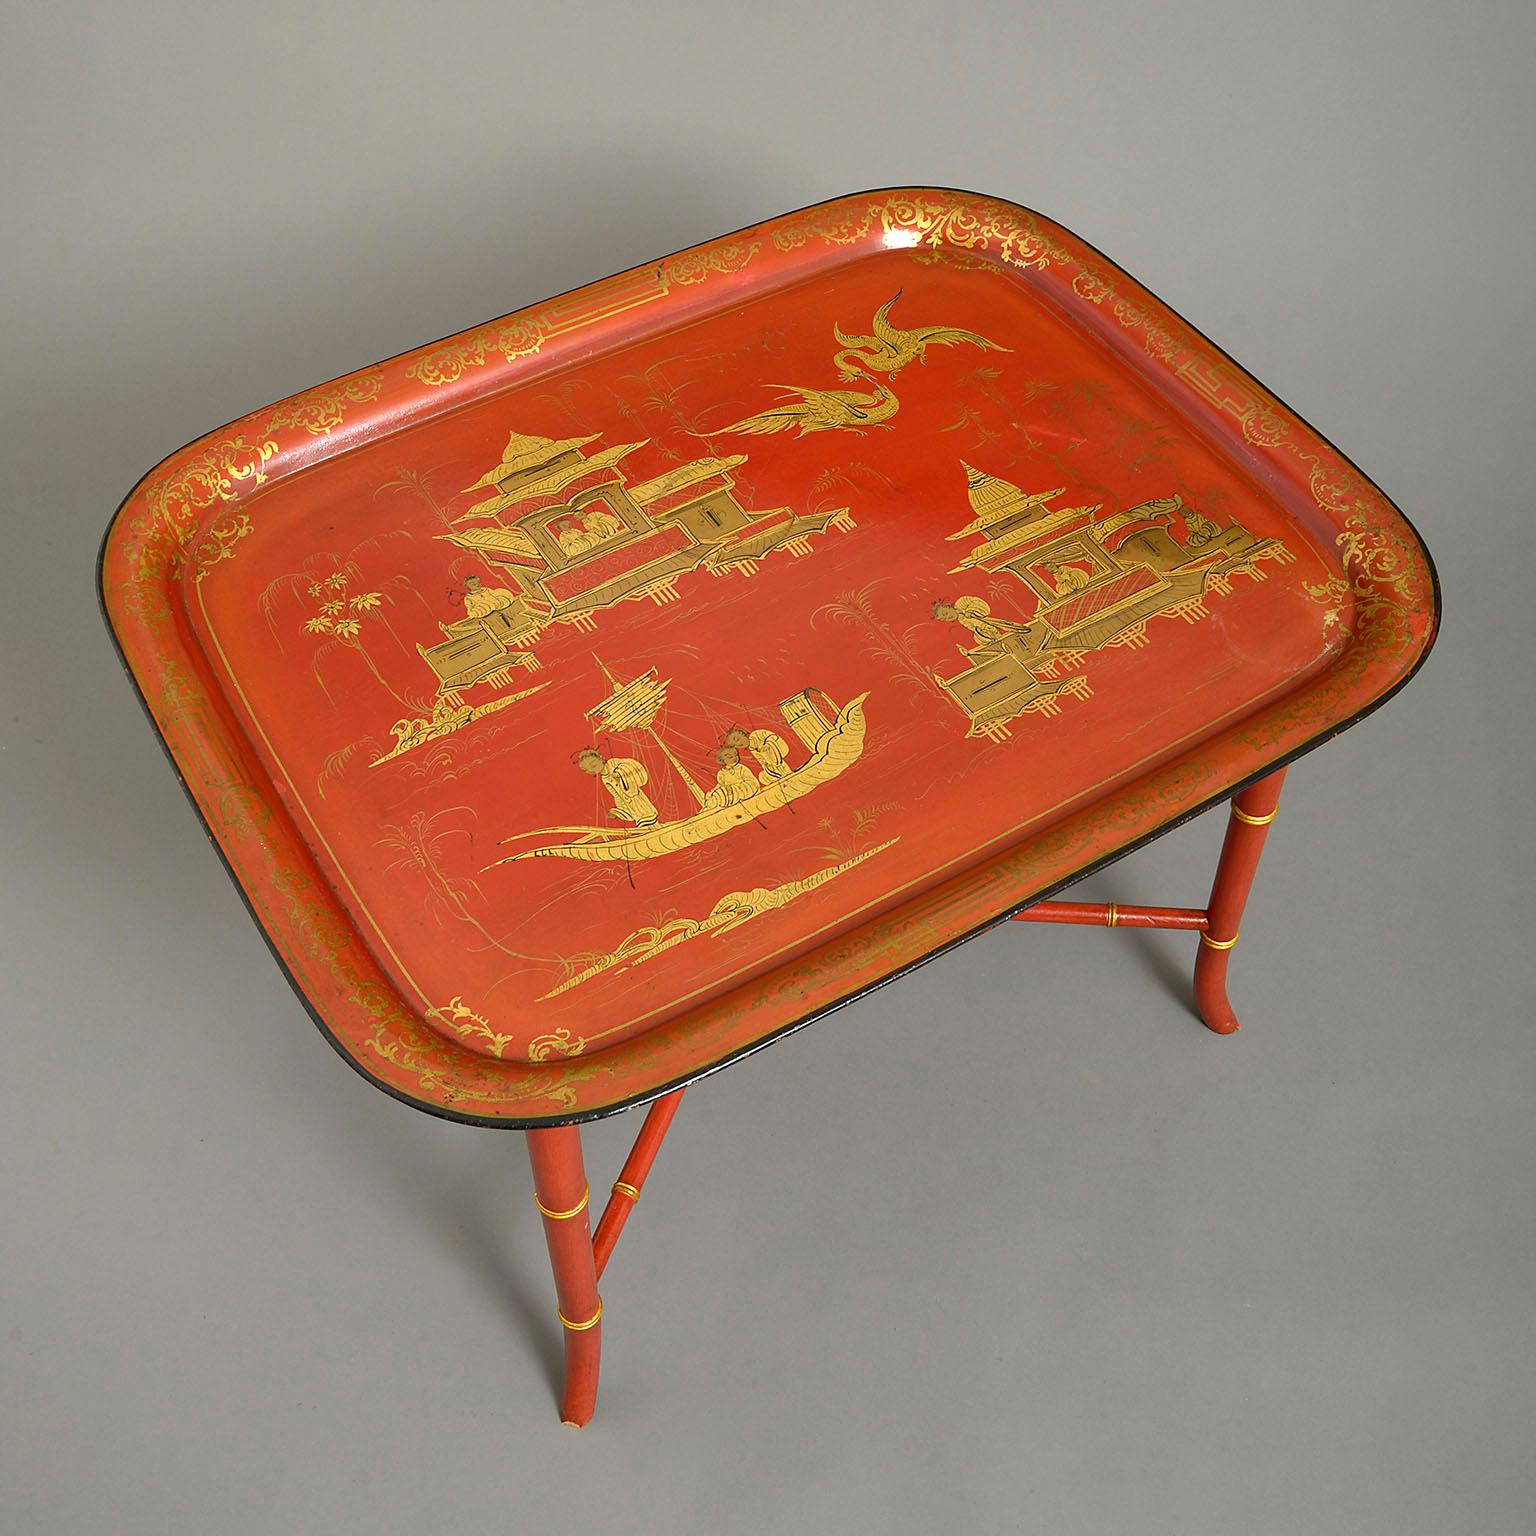 Chinoiserie Early 19th Century Regency Japanned Tôle Tray forming a Coffee Table